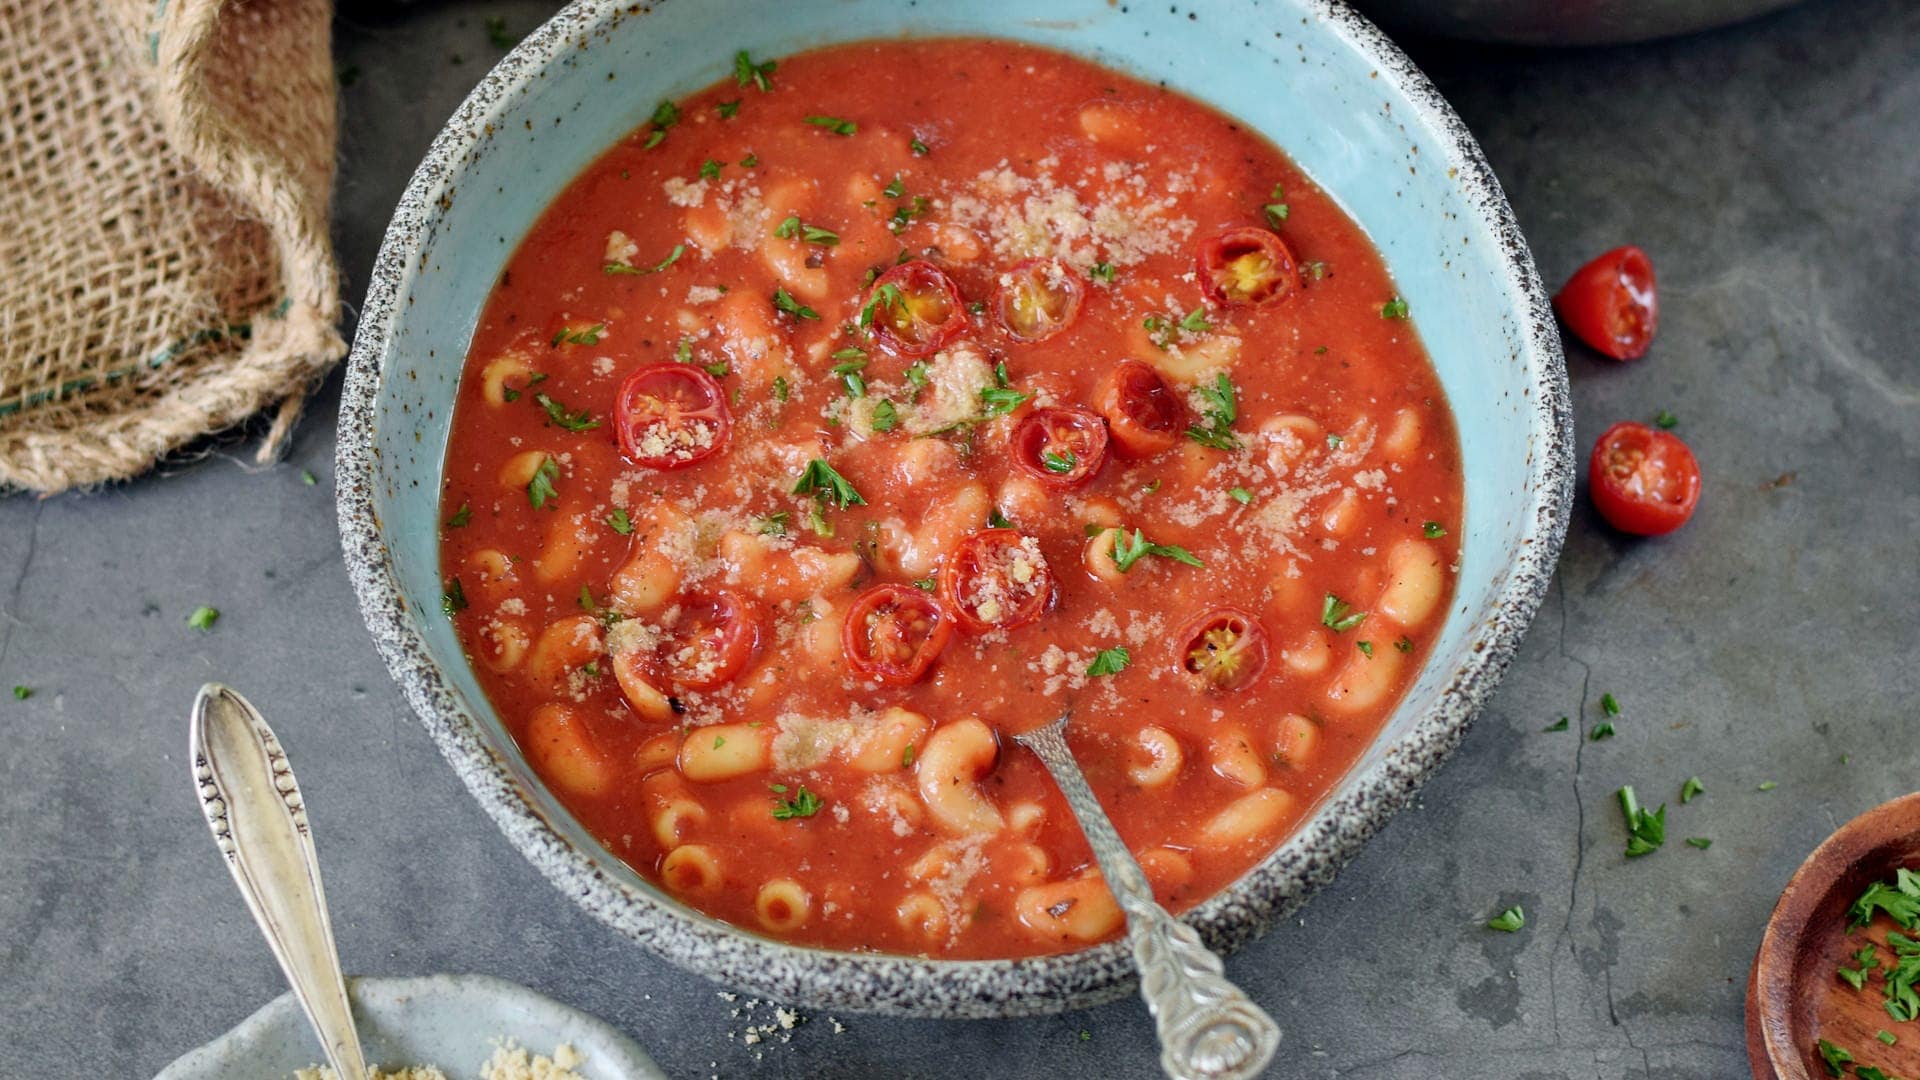 horizontal image of tomato pasta soup in bowl with roasted cherry tomatoes